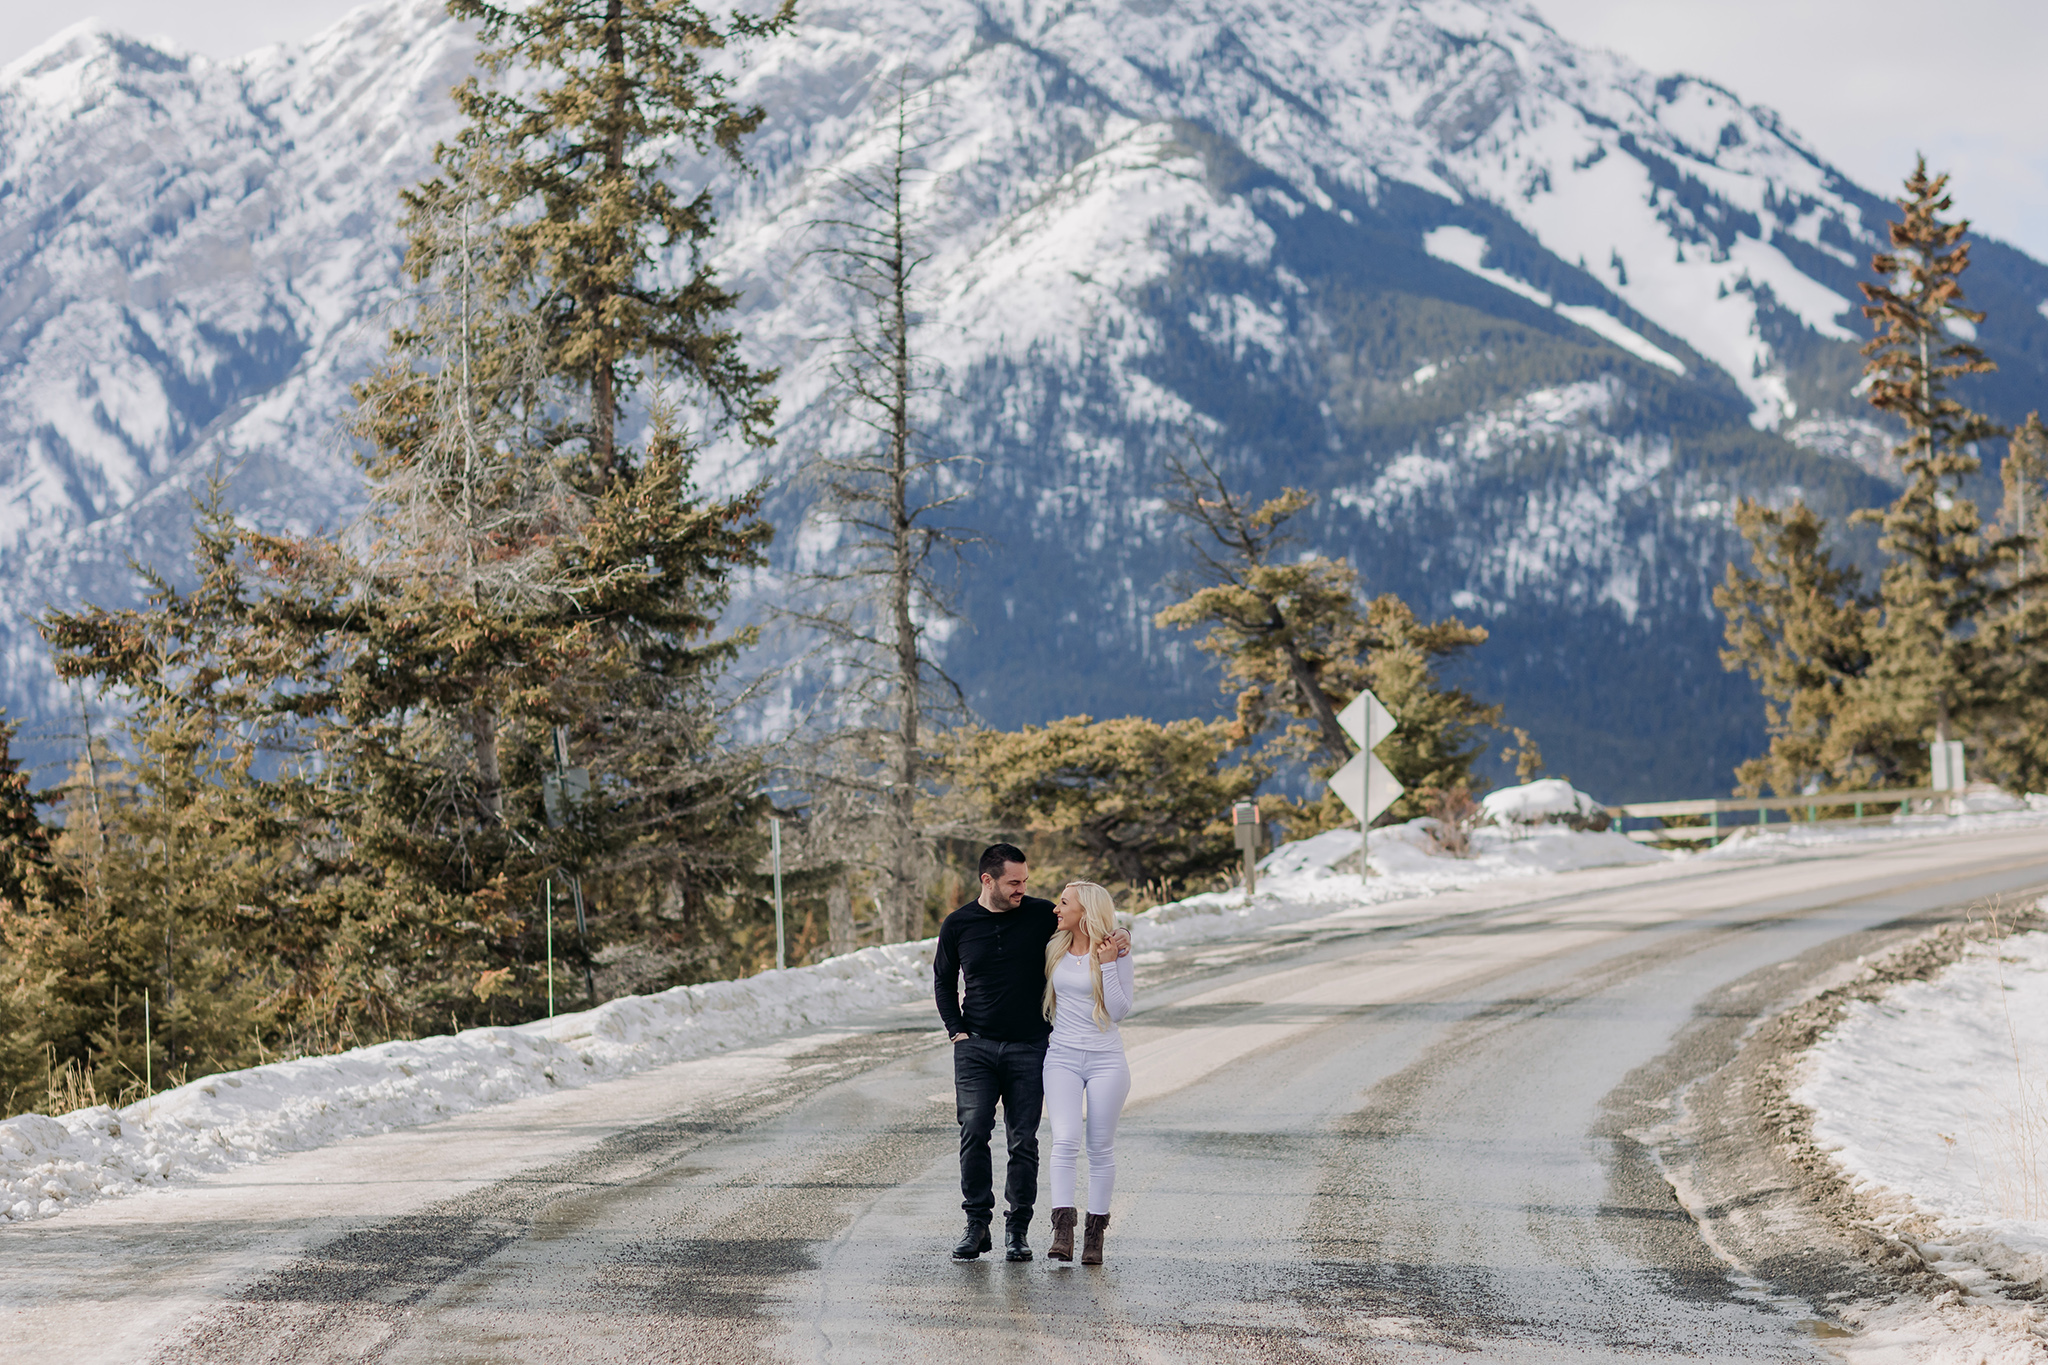 winter mountain vacation couple strolling by Surprise Corner in Banff National Park